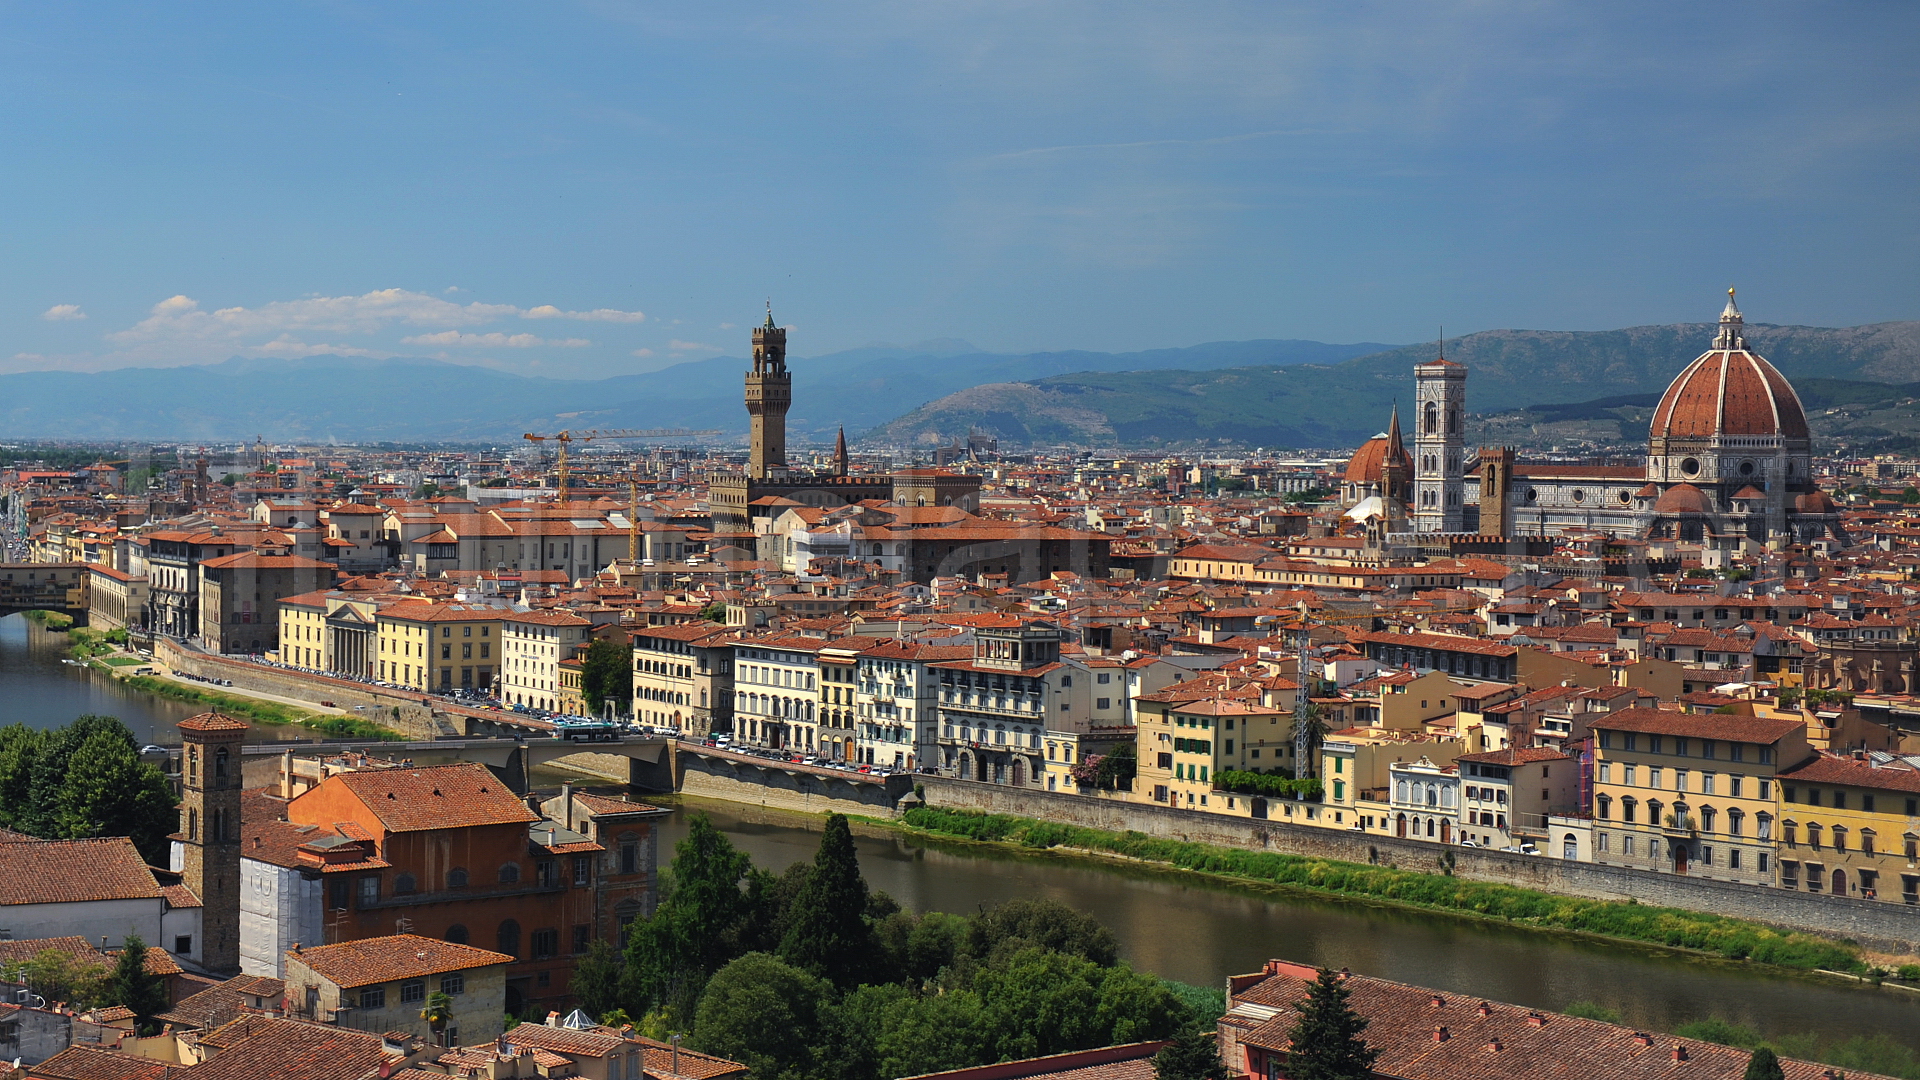 Firenze Florence Italy Tuscany Cityscapes Image Car Pictures